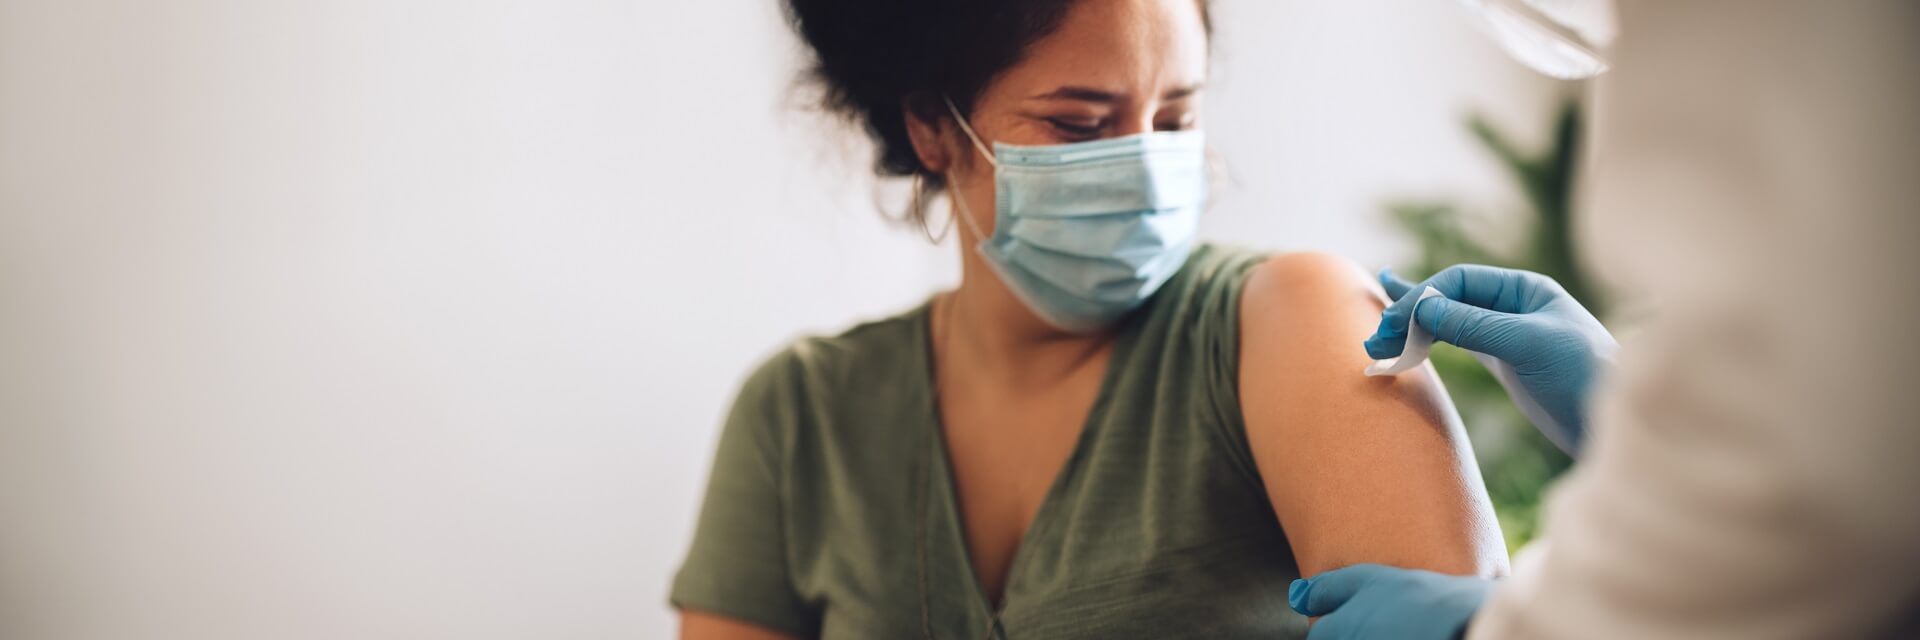 A woman is wearing a mask and getting vaccinated.